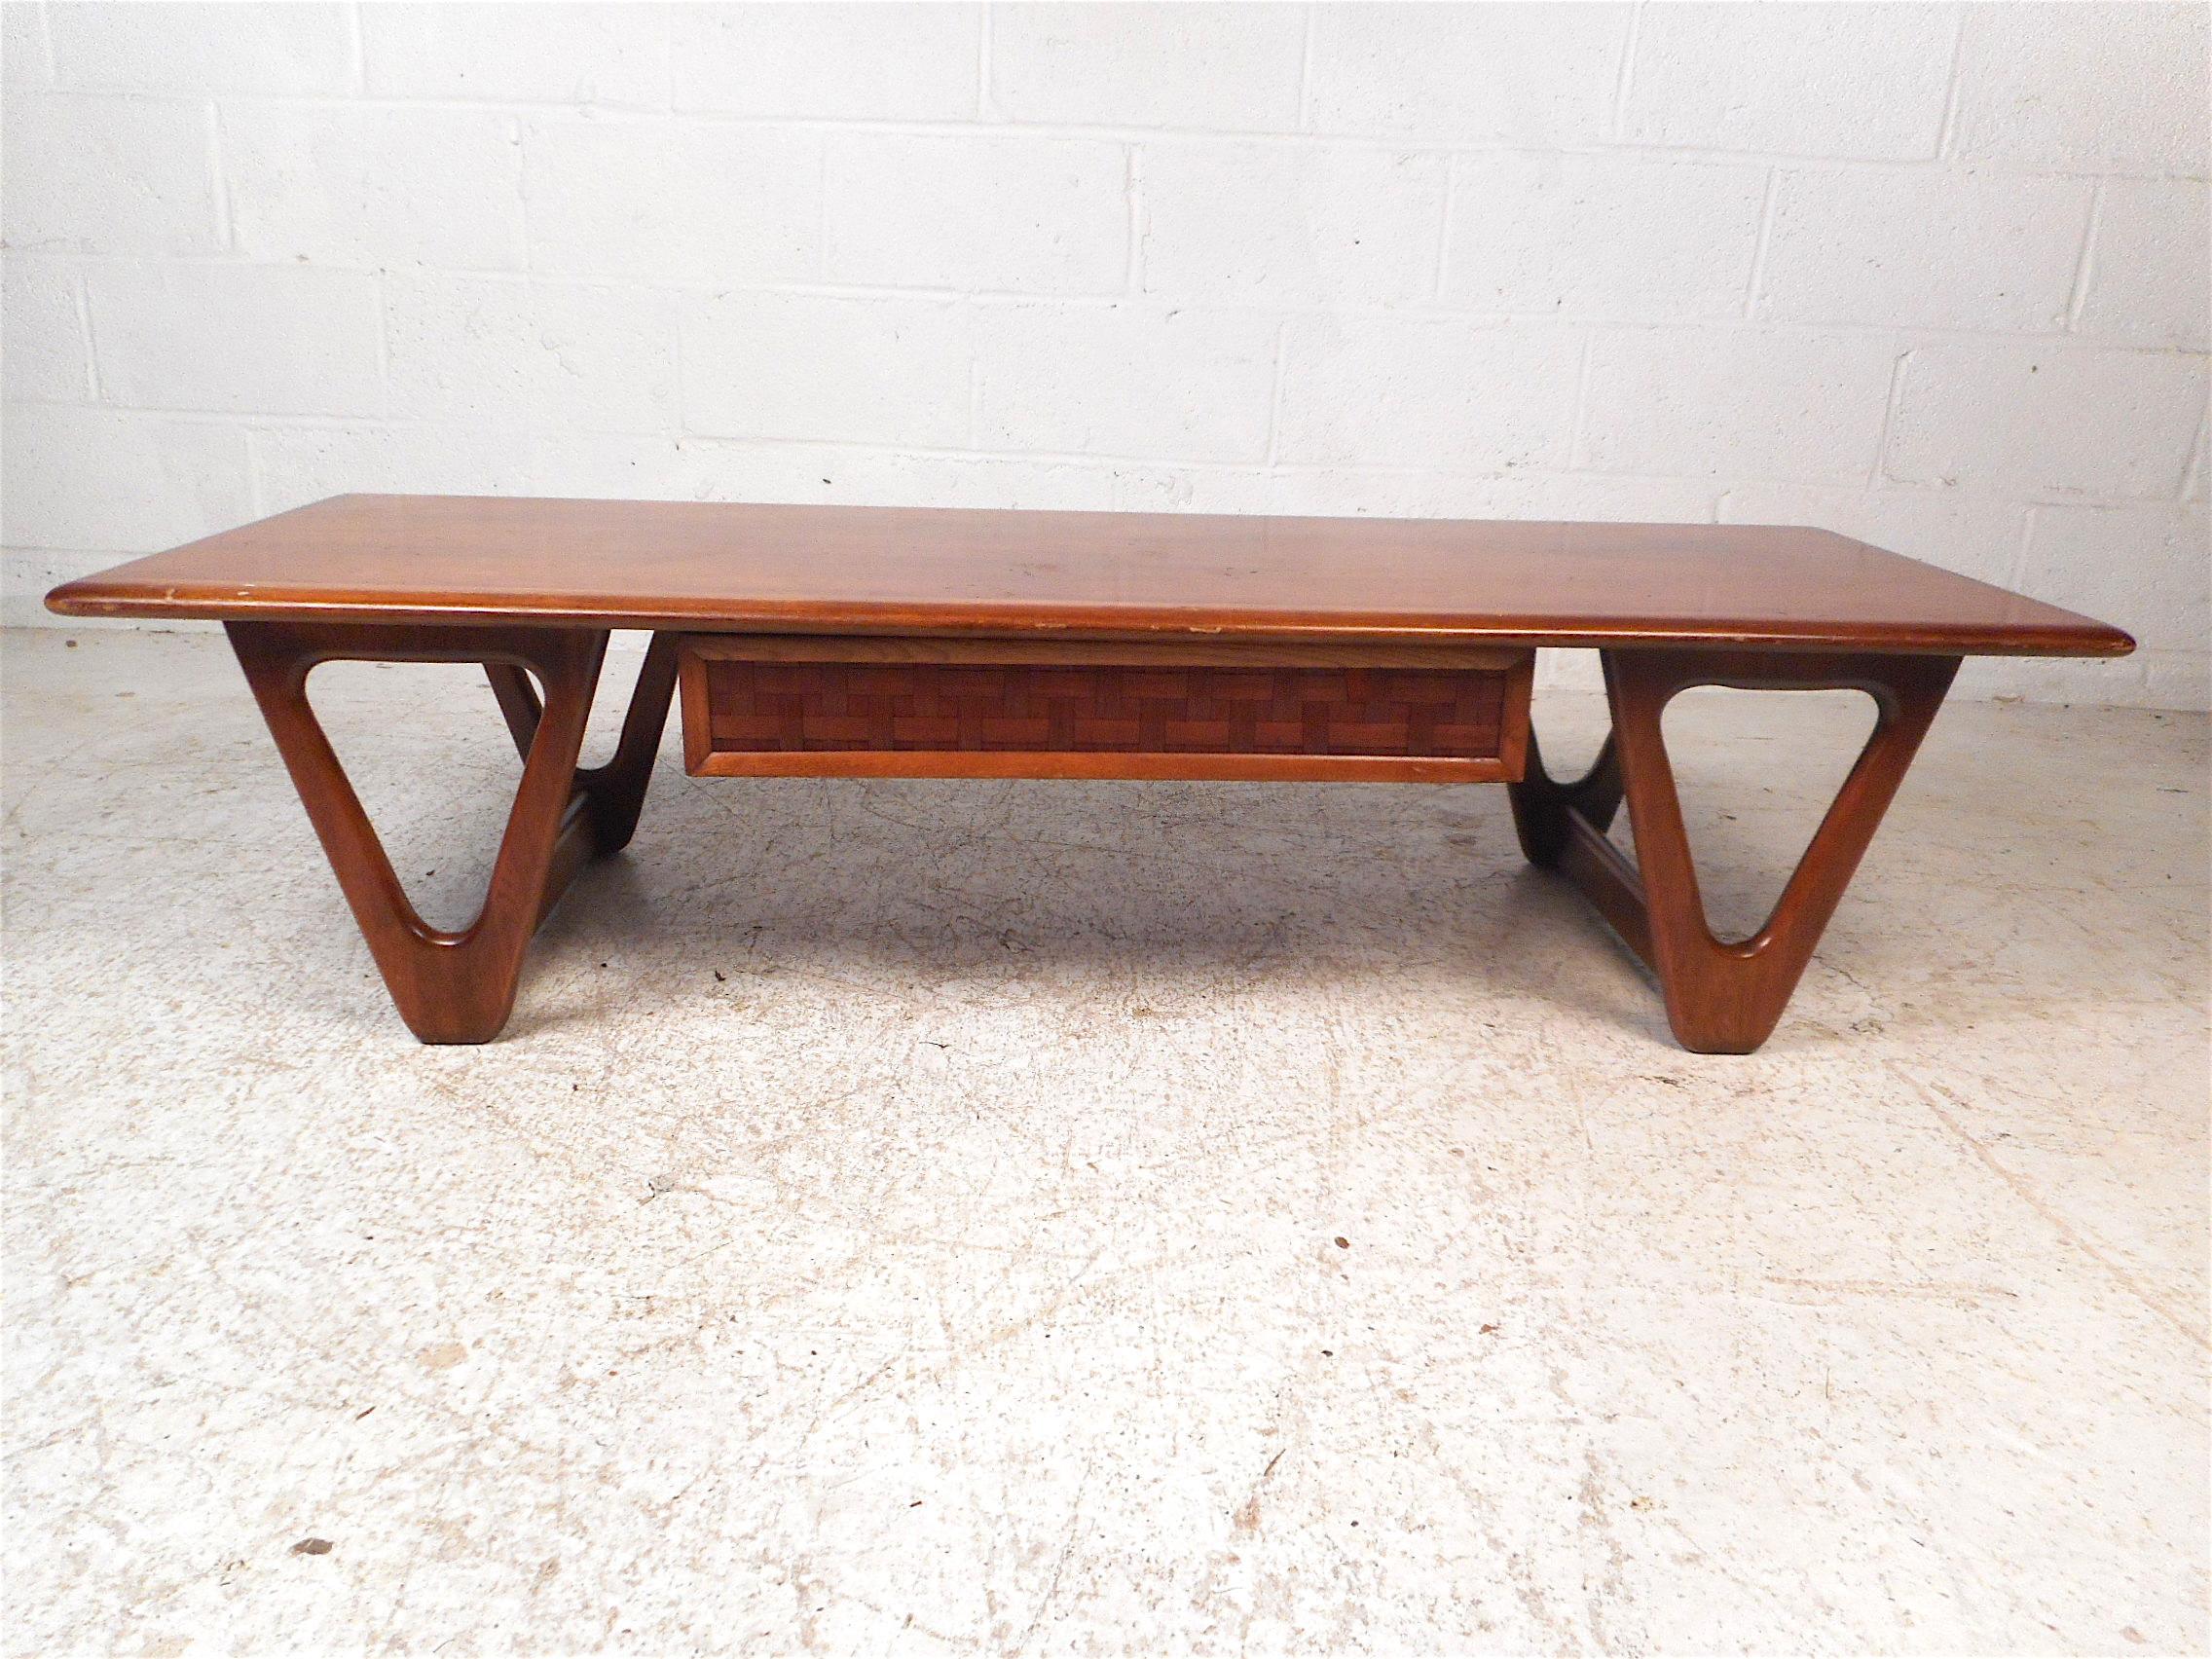 Stylish midcentury coffee table by Lane Furniture Company, circa 1960s. Ample table surface area, uniquely sculpted legs, one drawer under the tabletop with an interesting woven pattern on the drawer-front. This table would make a handsome addition